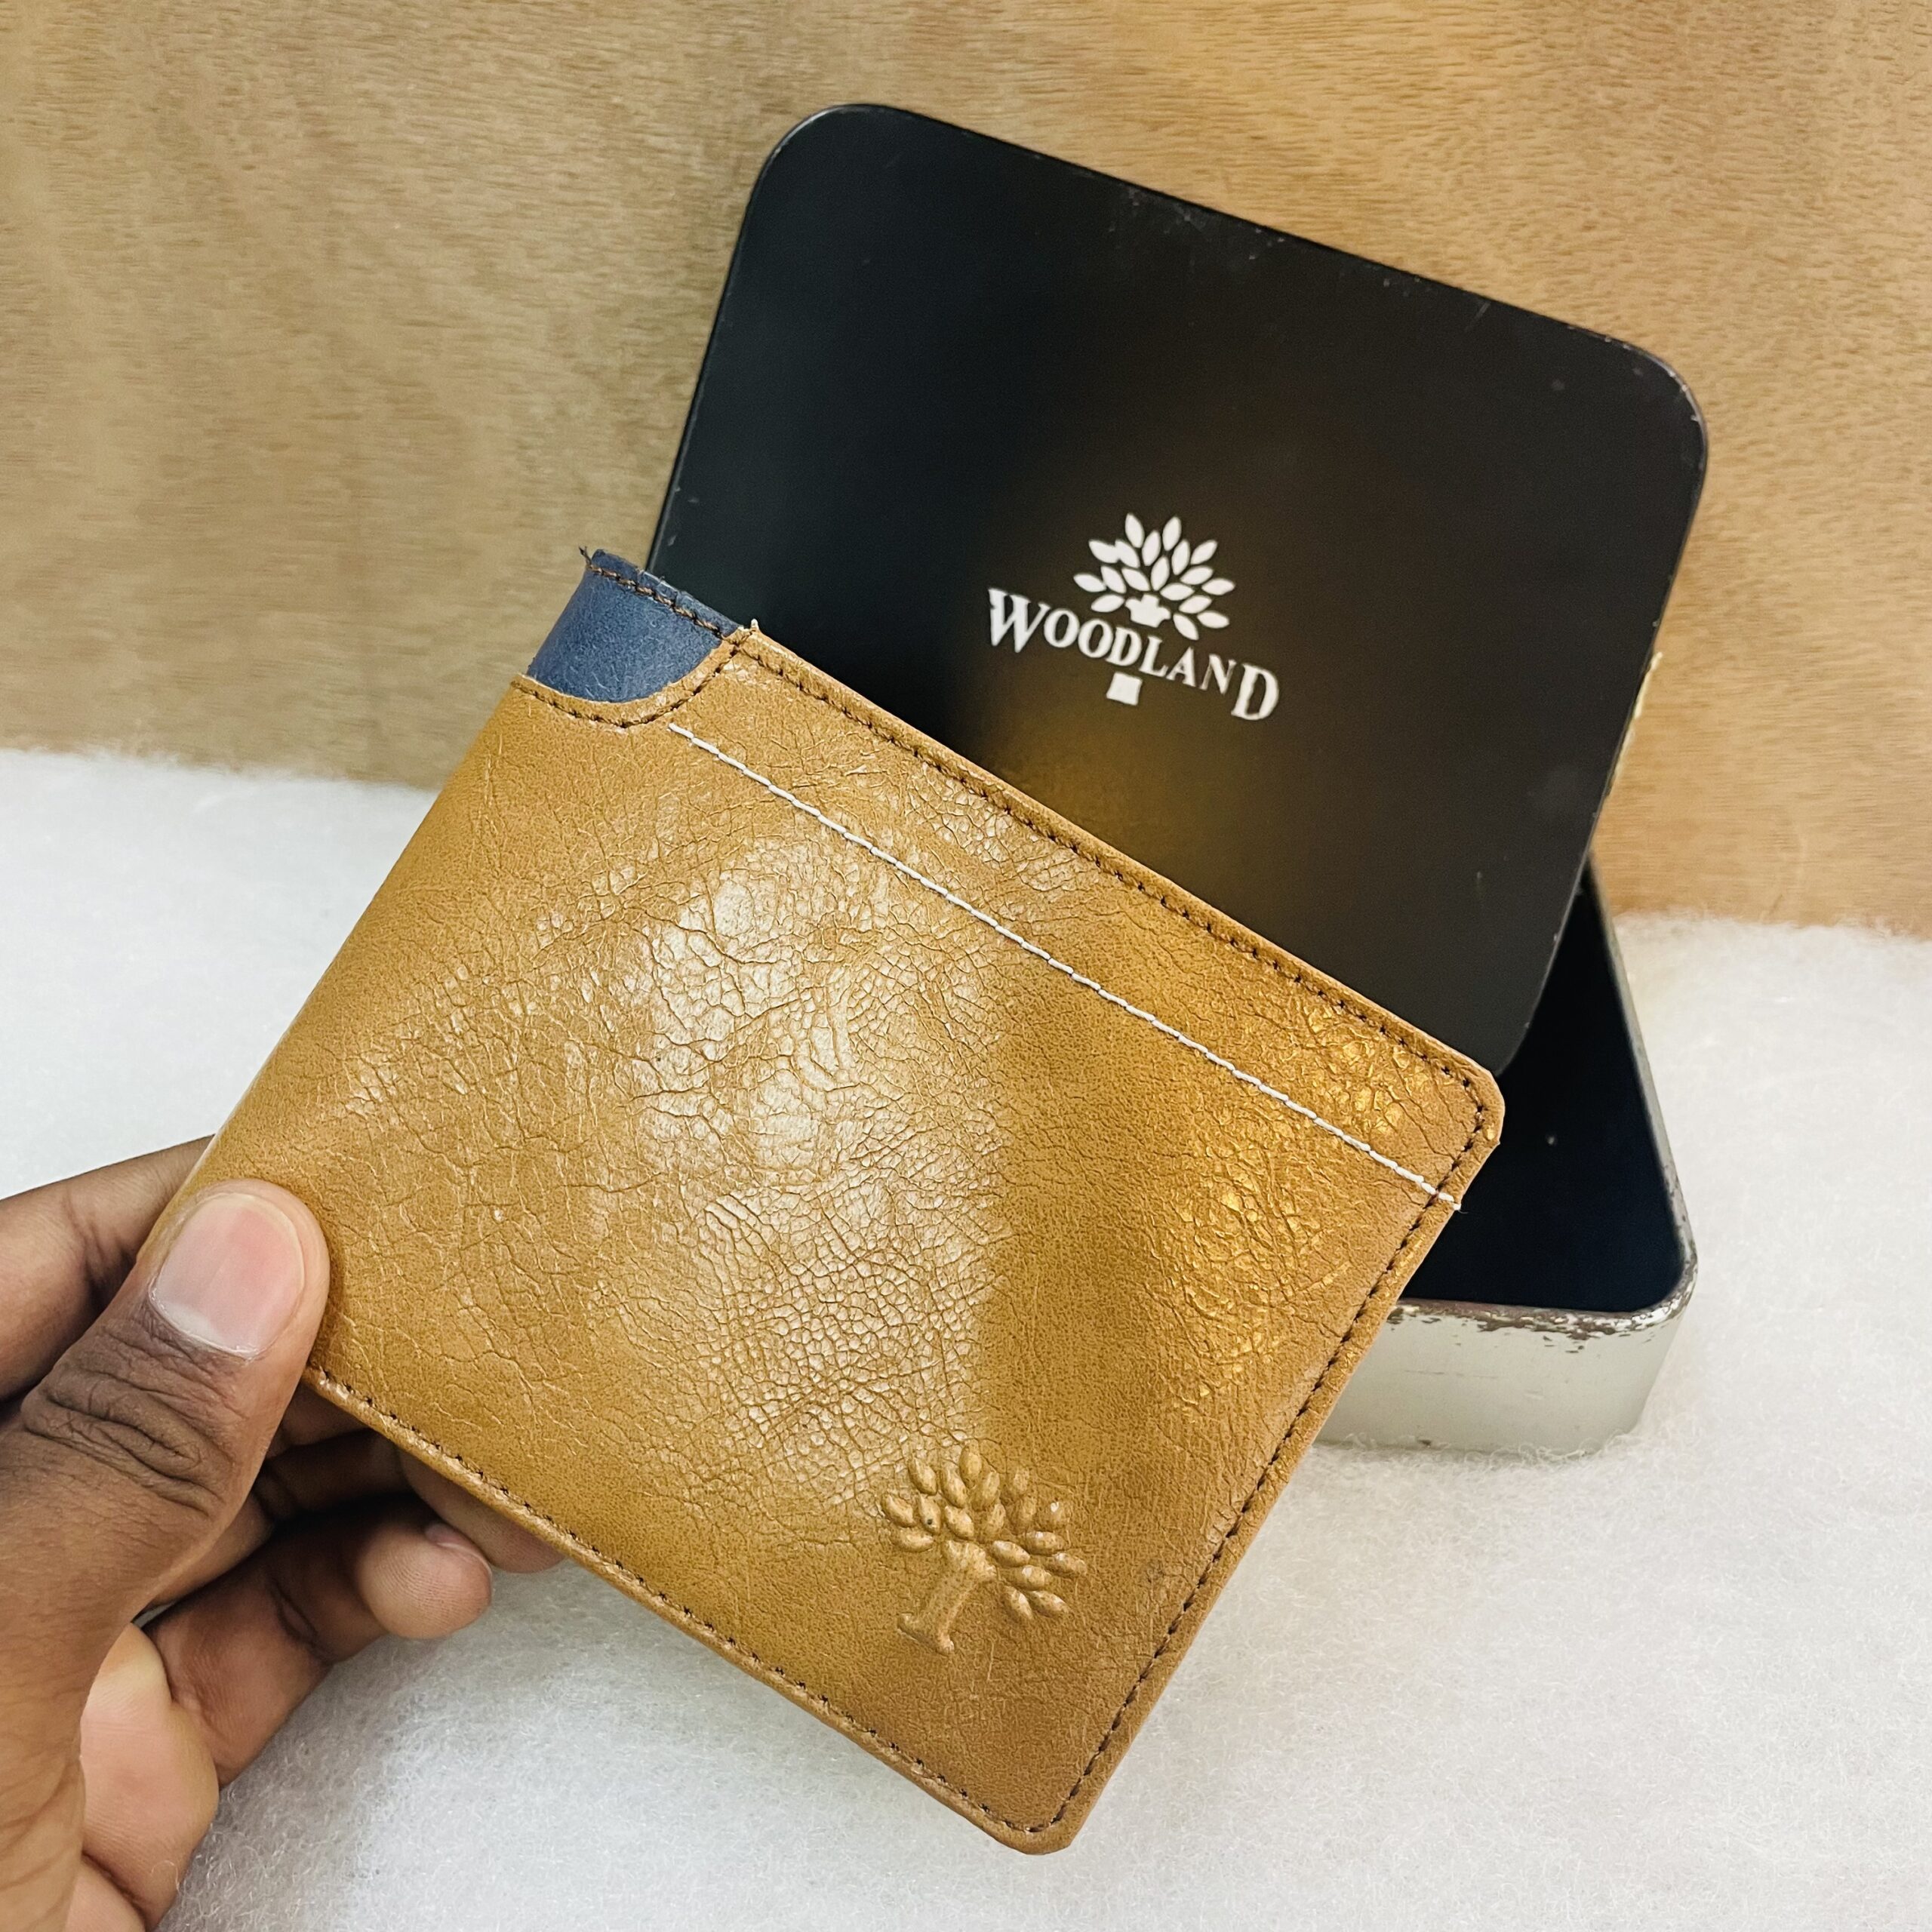 Woodland Wallet Latest Price, Dealers, Distributors & Suppliers